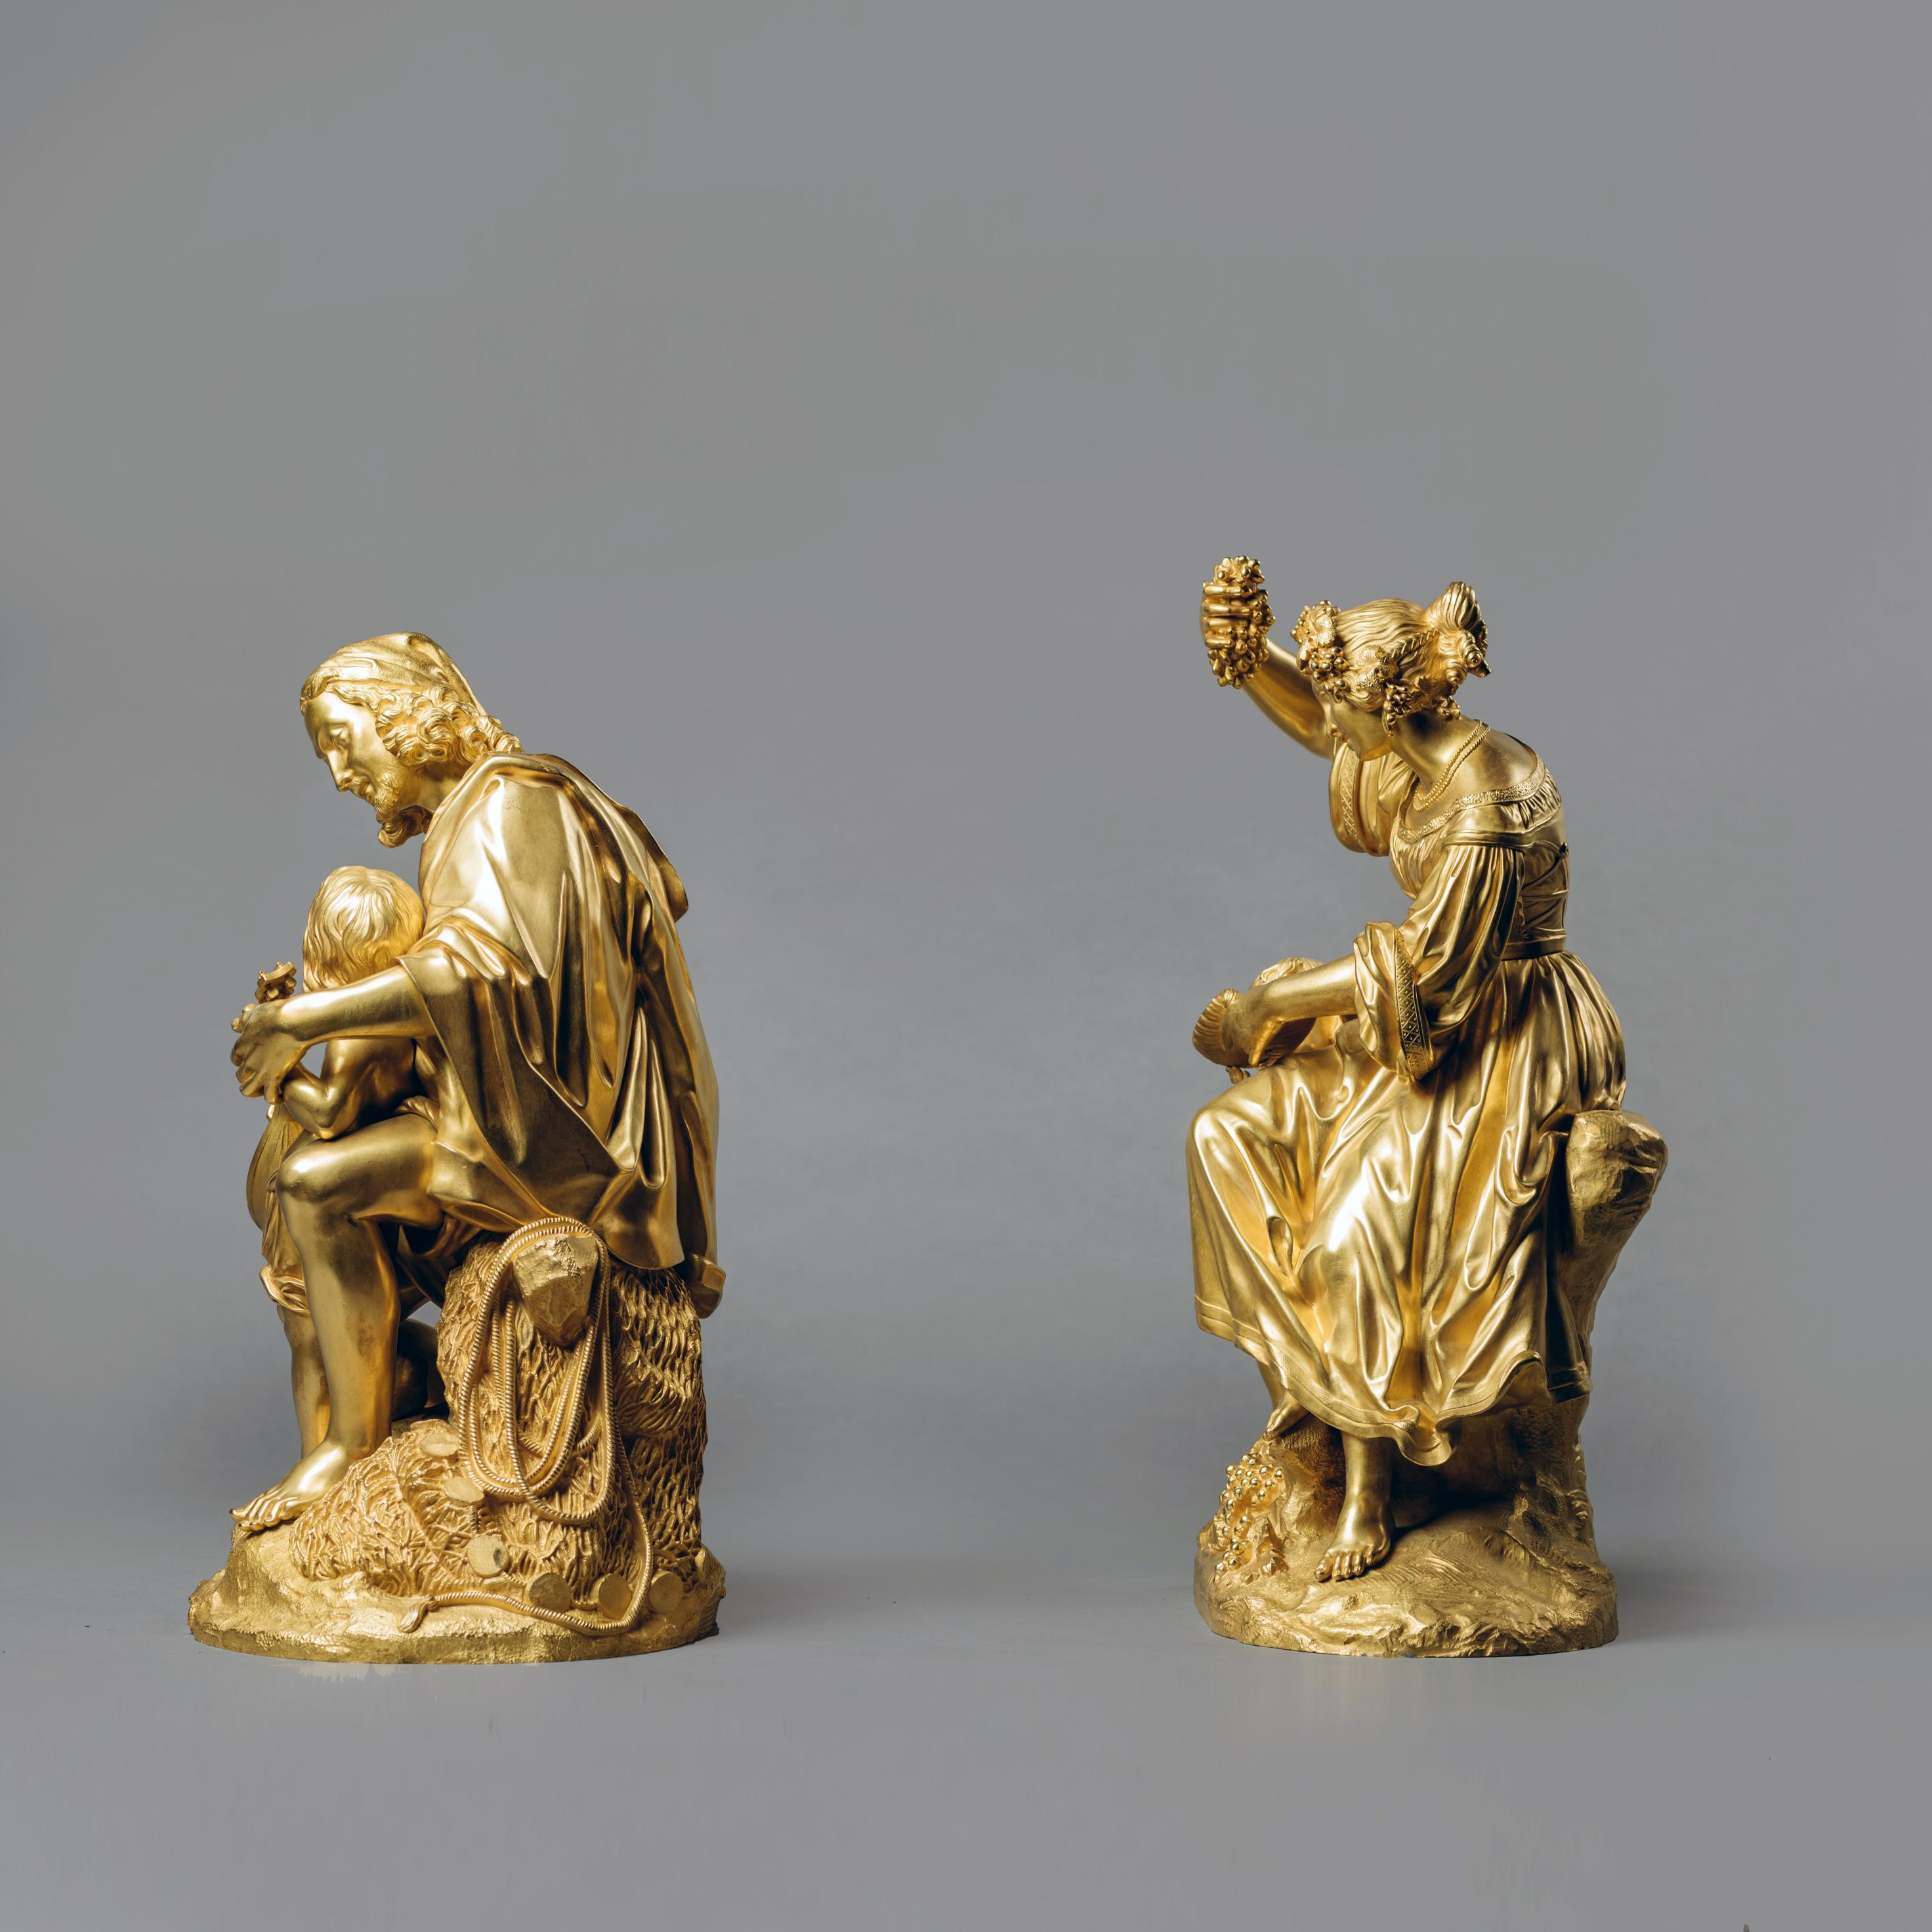 Pair of Restoration Period Gilt-Bronze Allegorical Groups. French, circa 1830 For Sale 1